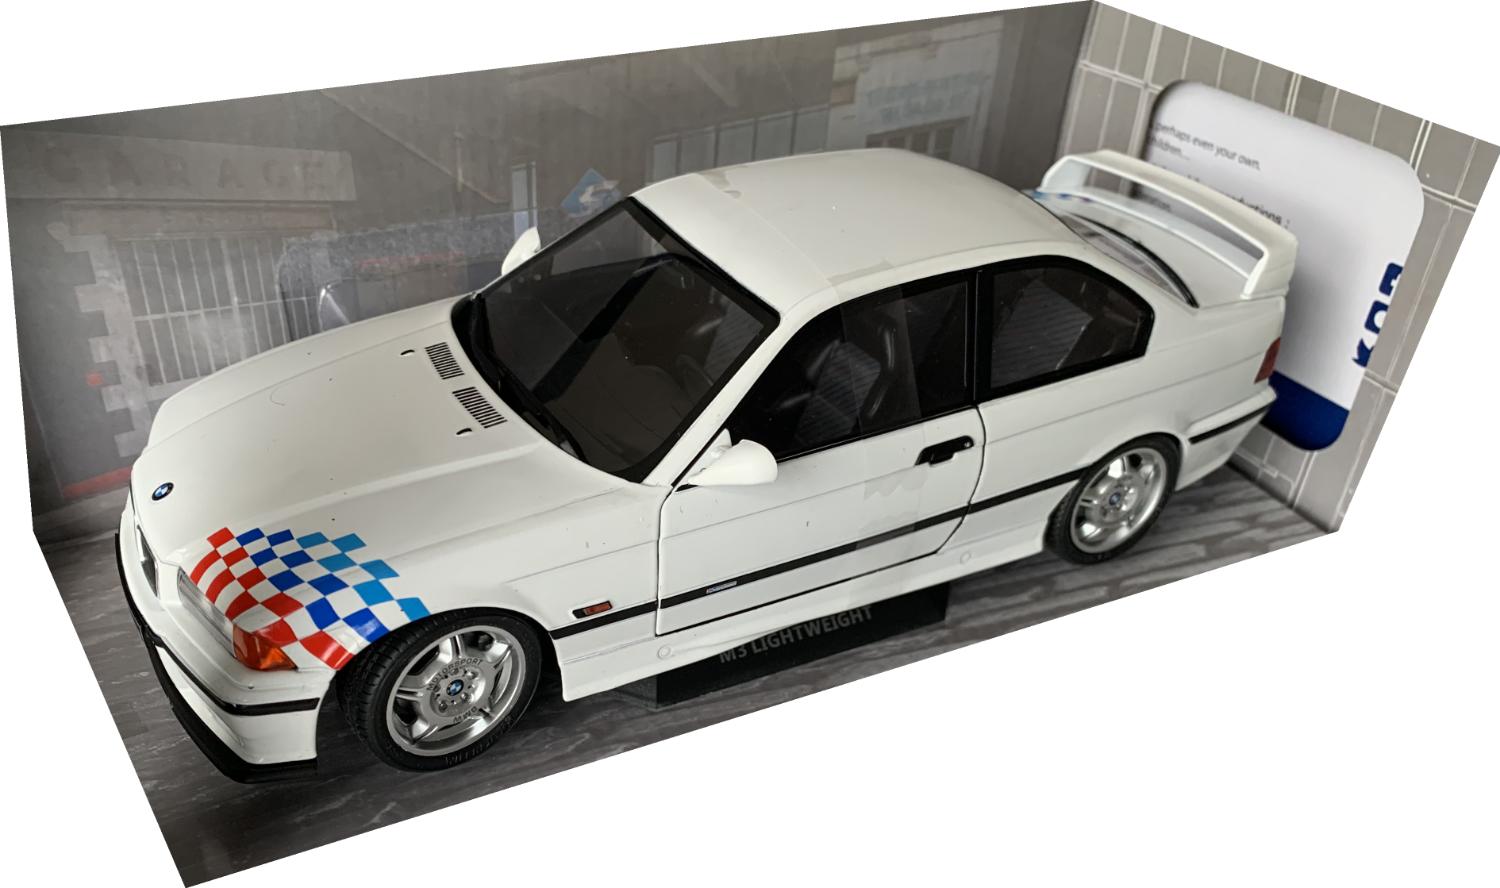 An excellent scale model of the BMW E36 Coupe M3 Lightweight with high level of detail throughout, all authentically recreated